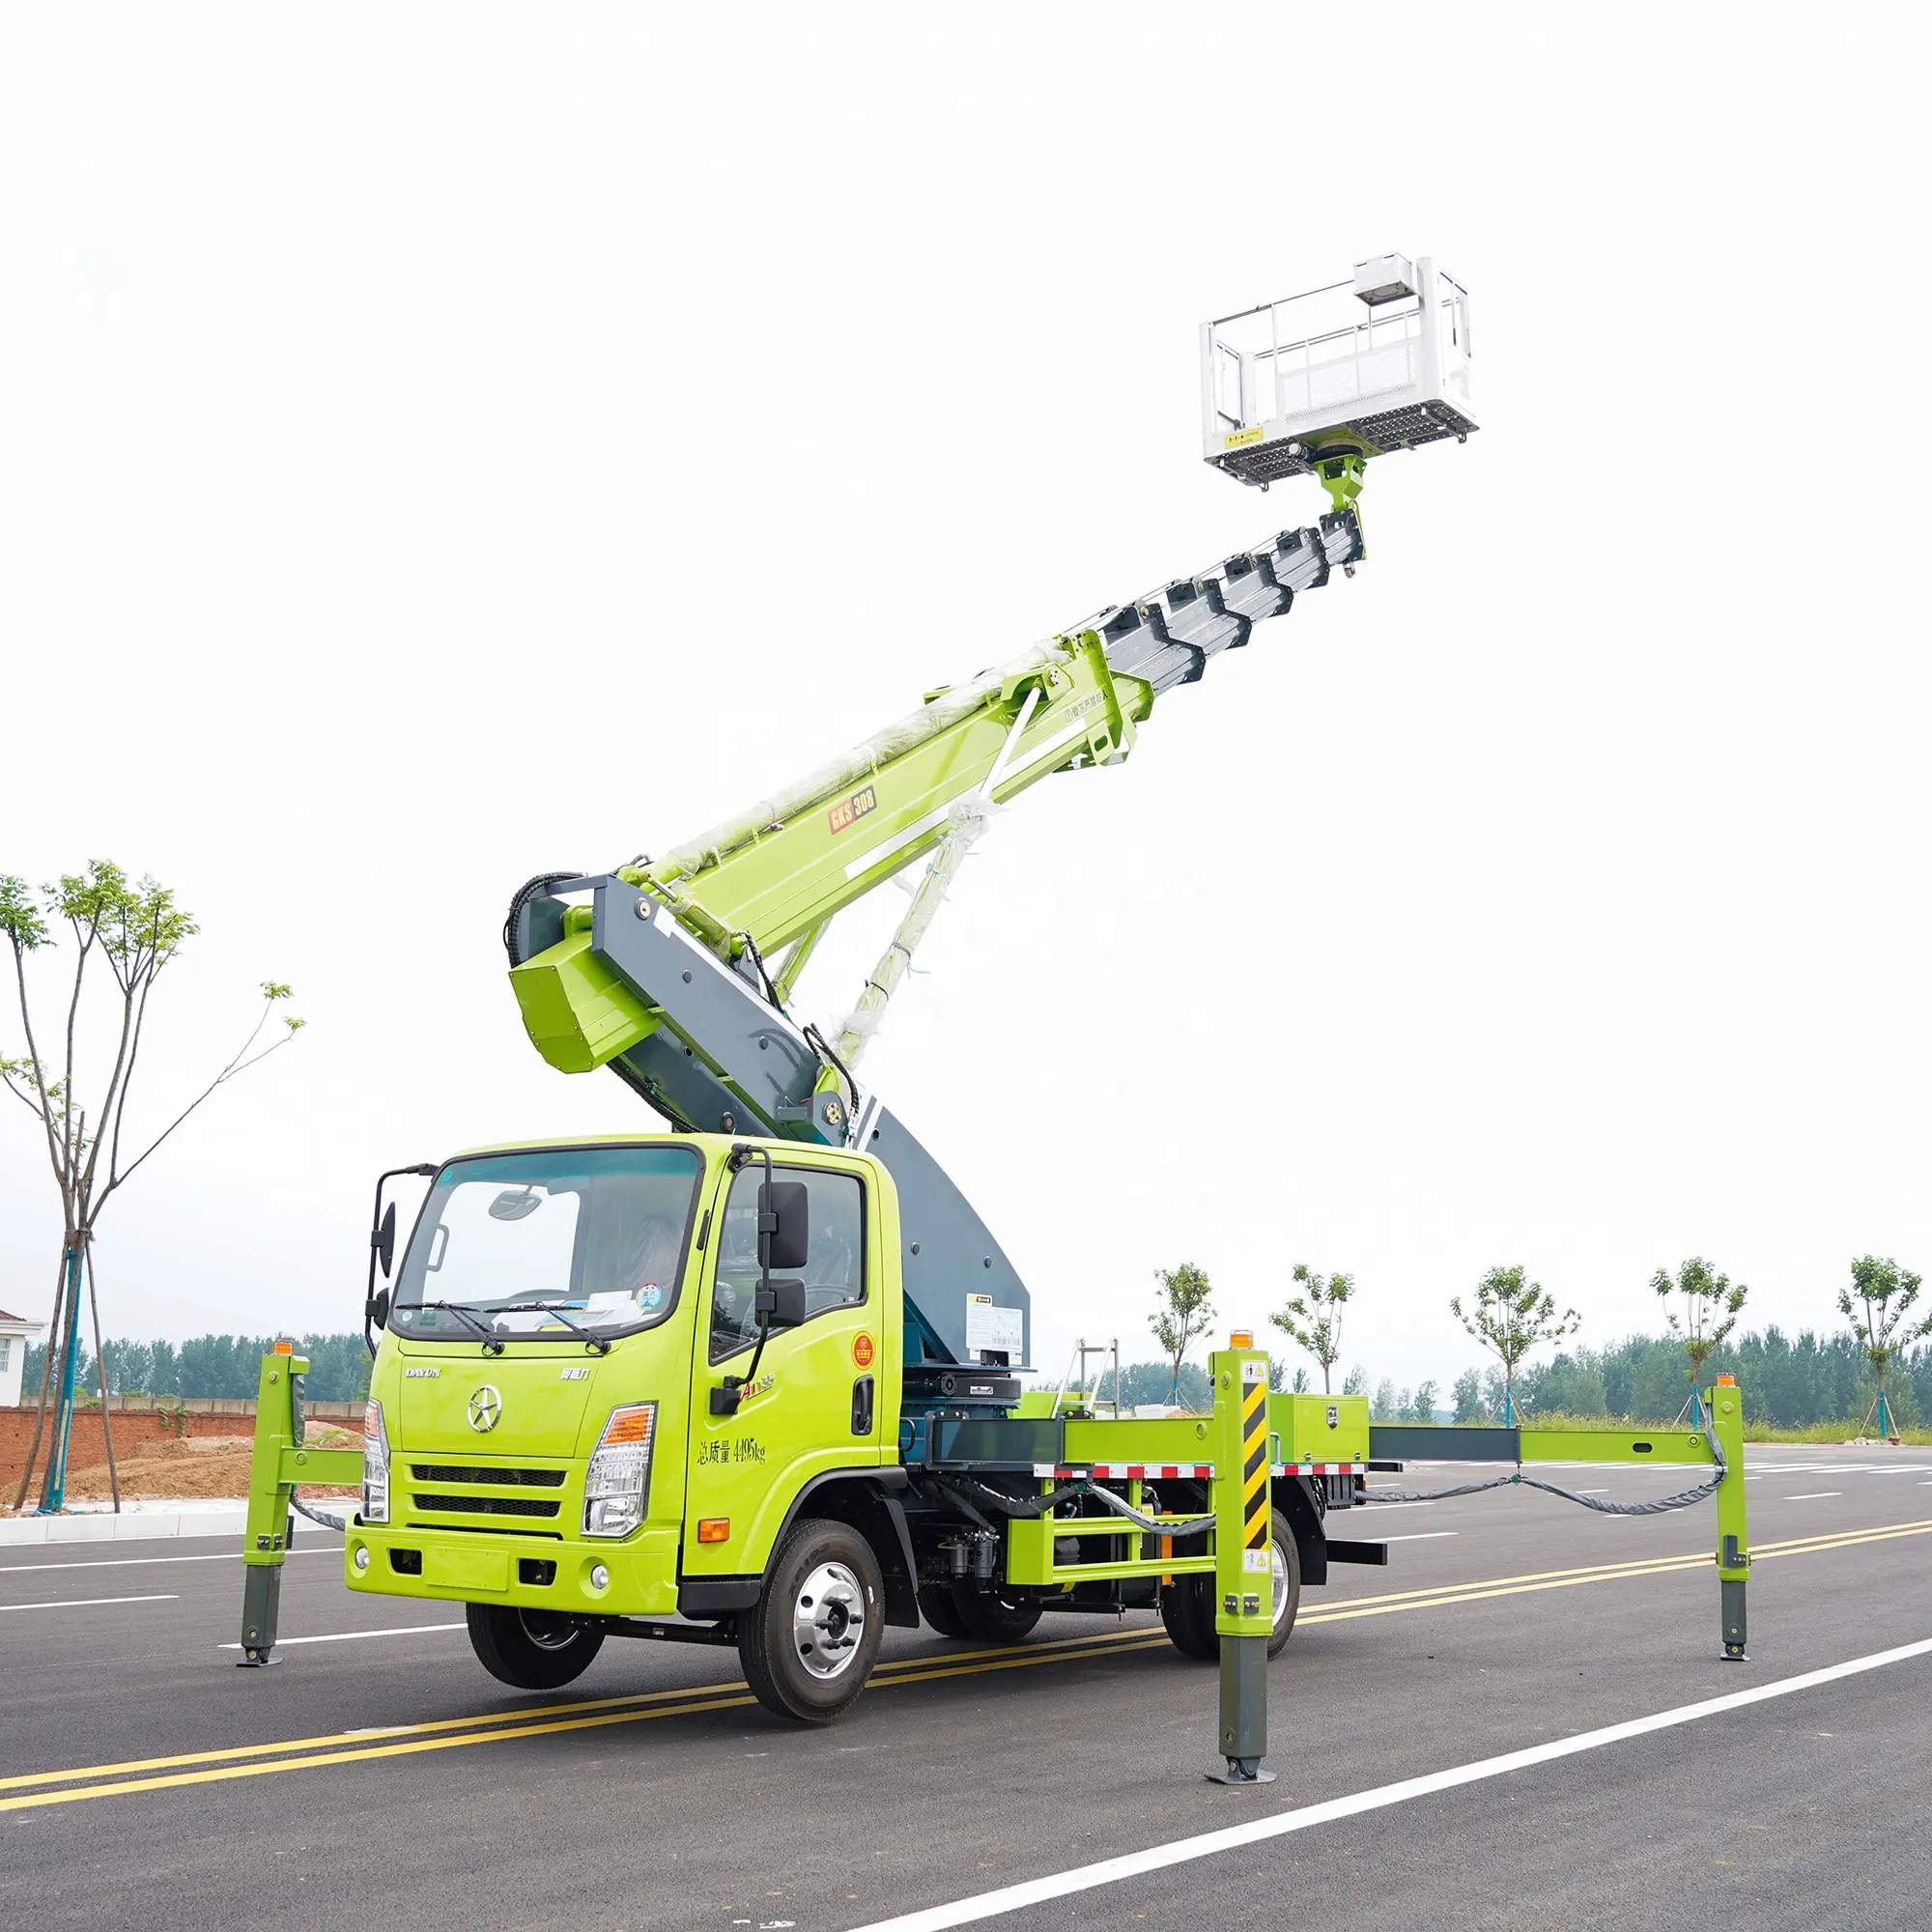 Hot Sale 30M 28M 36M Skylift Telescopic Lifting Aerial Work Platform Truck For Sale In Russian